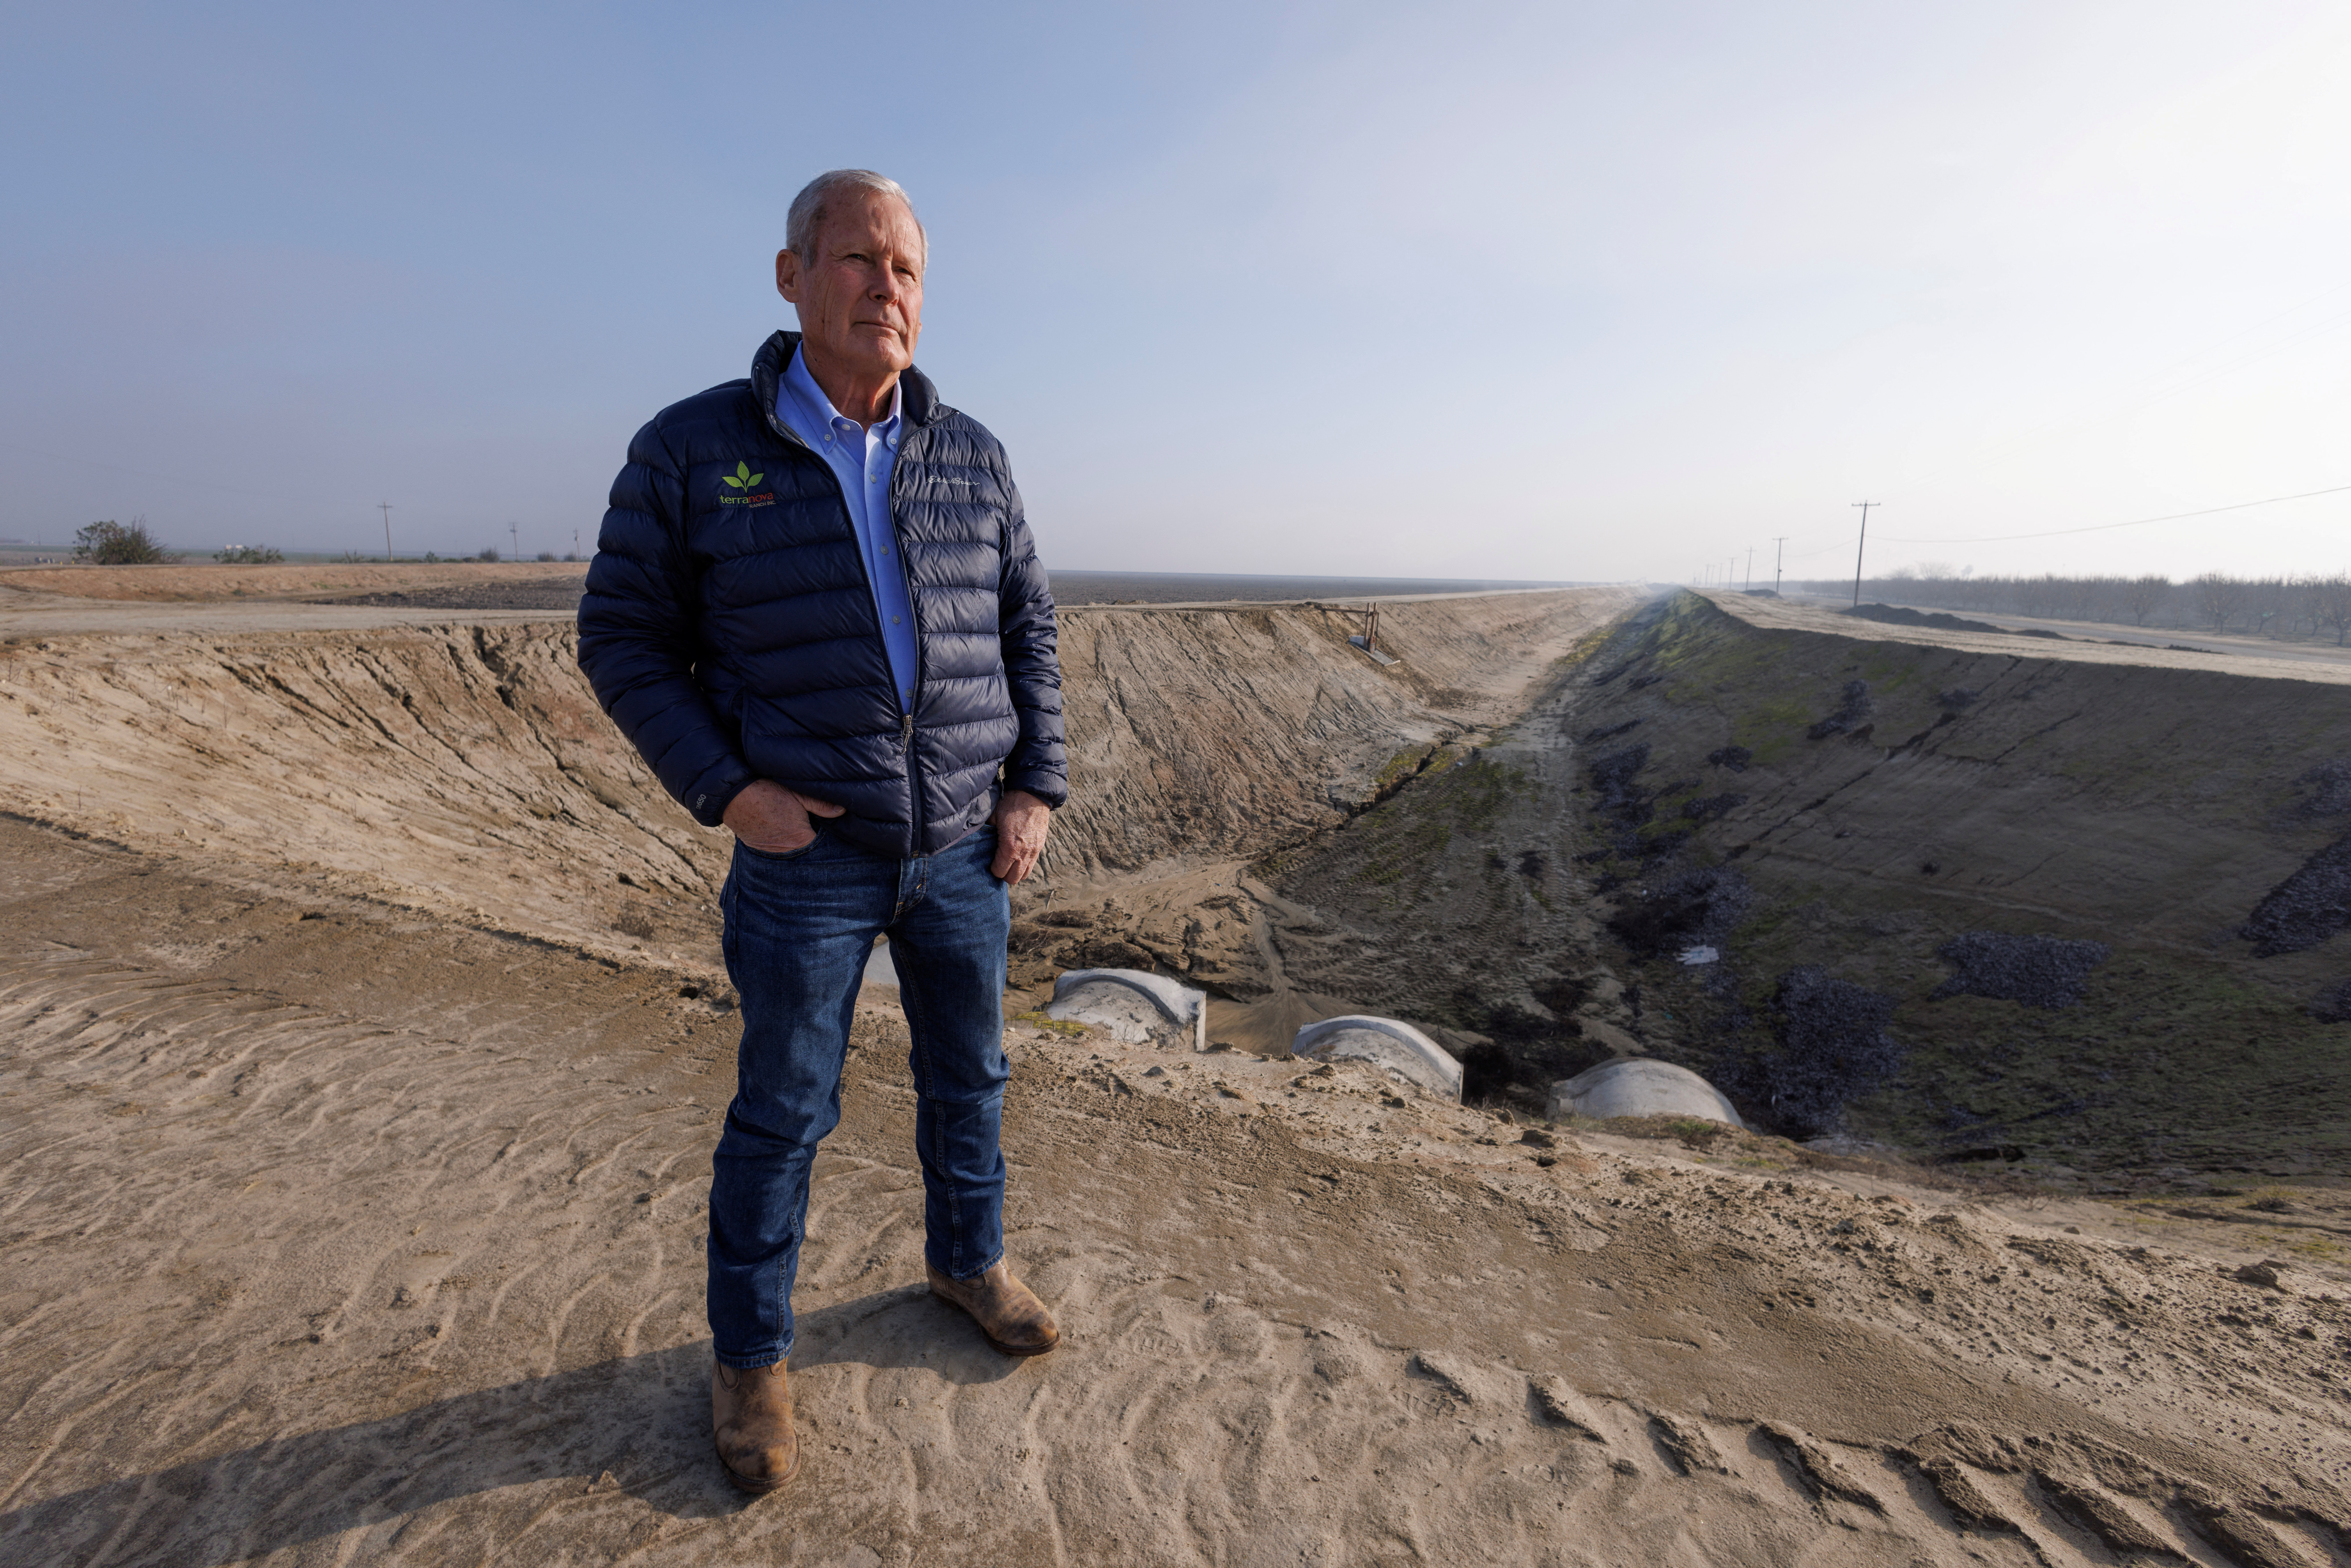 Don Cameron stands next to one of his flood capture projects on his Terranova Ranch in Helm, California